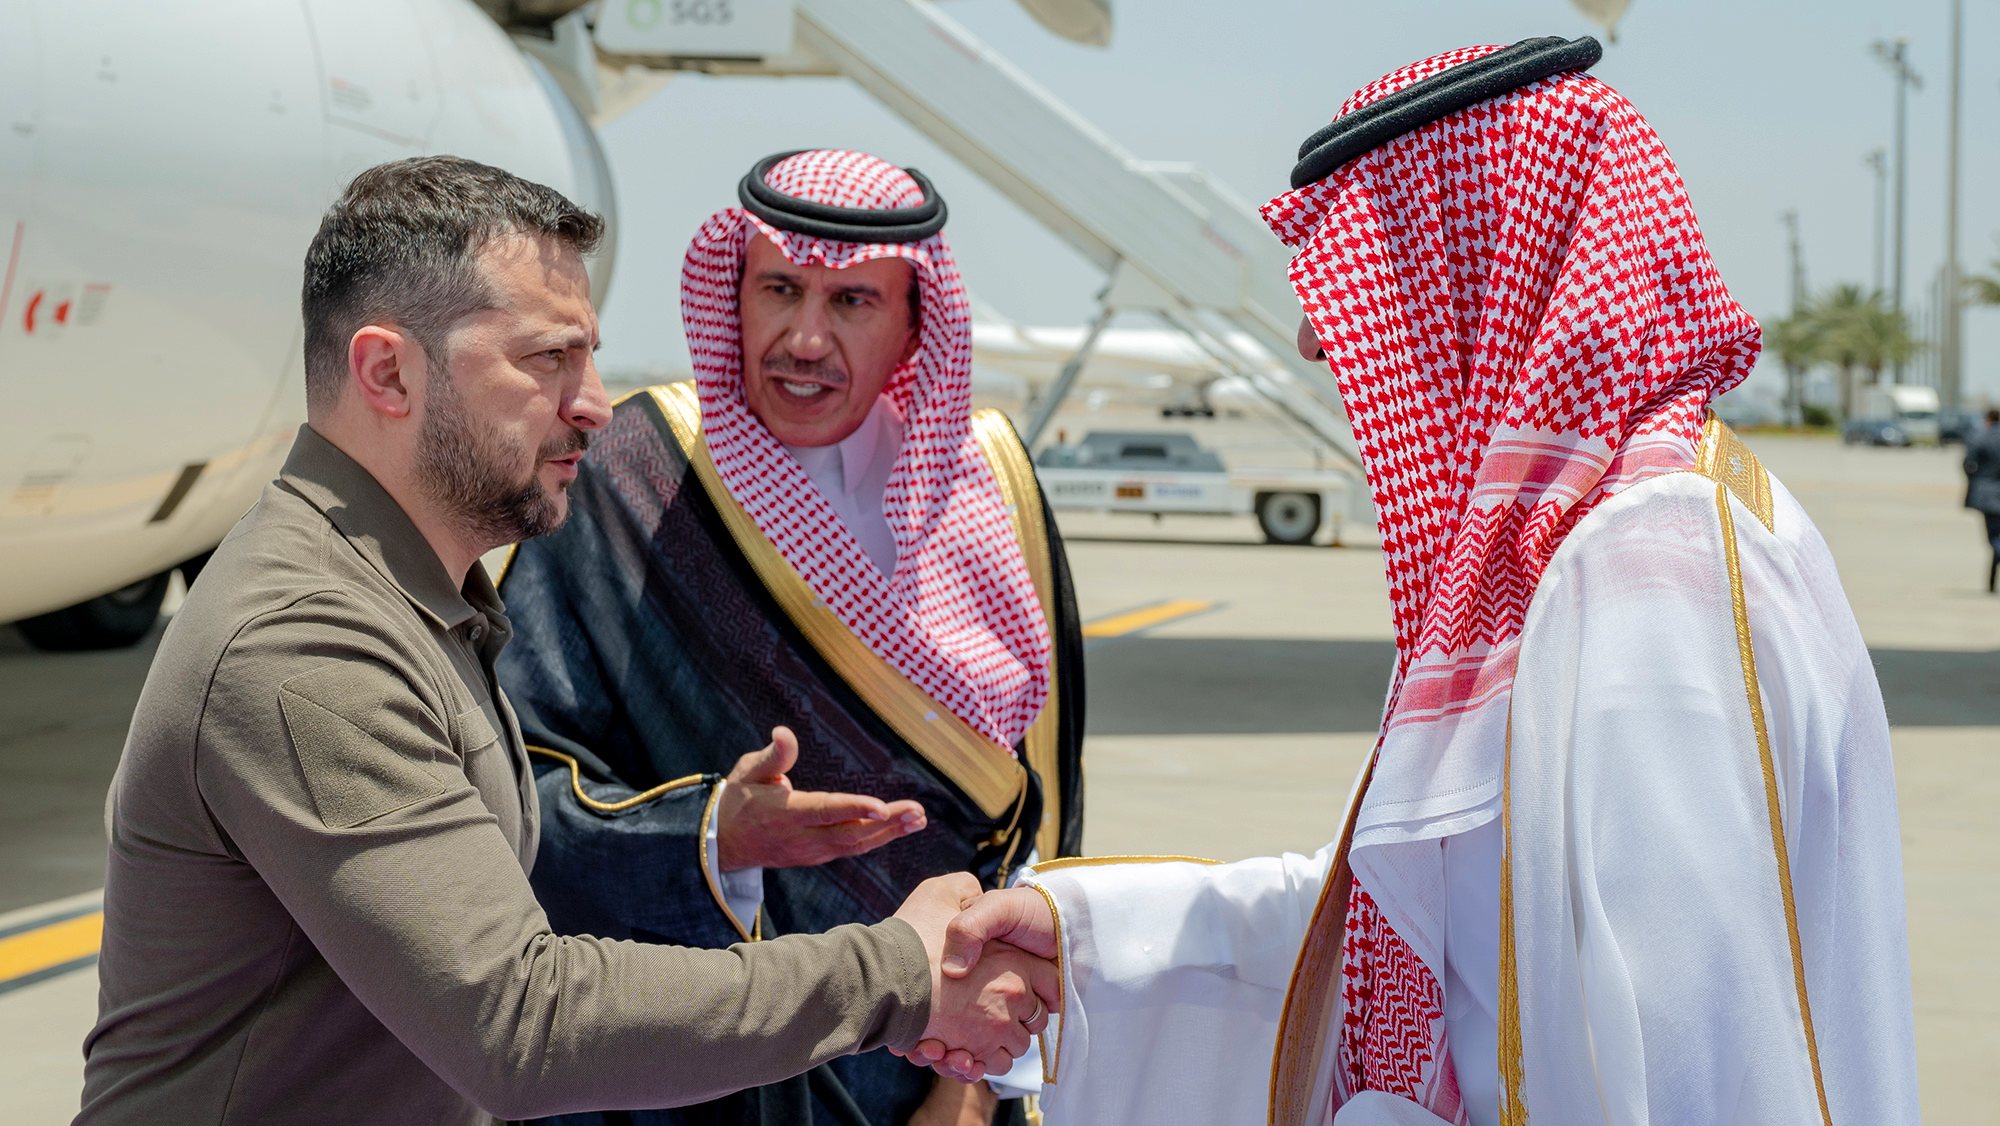 epa10638696 A handout photo made available by the Saudi Press Agency (SPA) shows Deputy Governor of Saudi Arabia&#039;s Makkah Region, Prince Badr bin Sultan bin Abdulaziz Al Saud (R) greeting Ukrainian president Volodymyr Zelensky upon his arrival to attend the 32nd Arab League summit, in Jeddah, Saudi Arabia, 19 May 2023. Zelensky is on his first-ever visit to Saudi Arabia.  EPA/SAUDI PRESS AGENCY HANDOUT  HANDOUT EDITORIAL USE ONLY/NO SALES